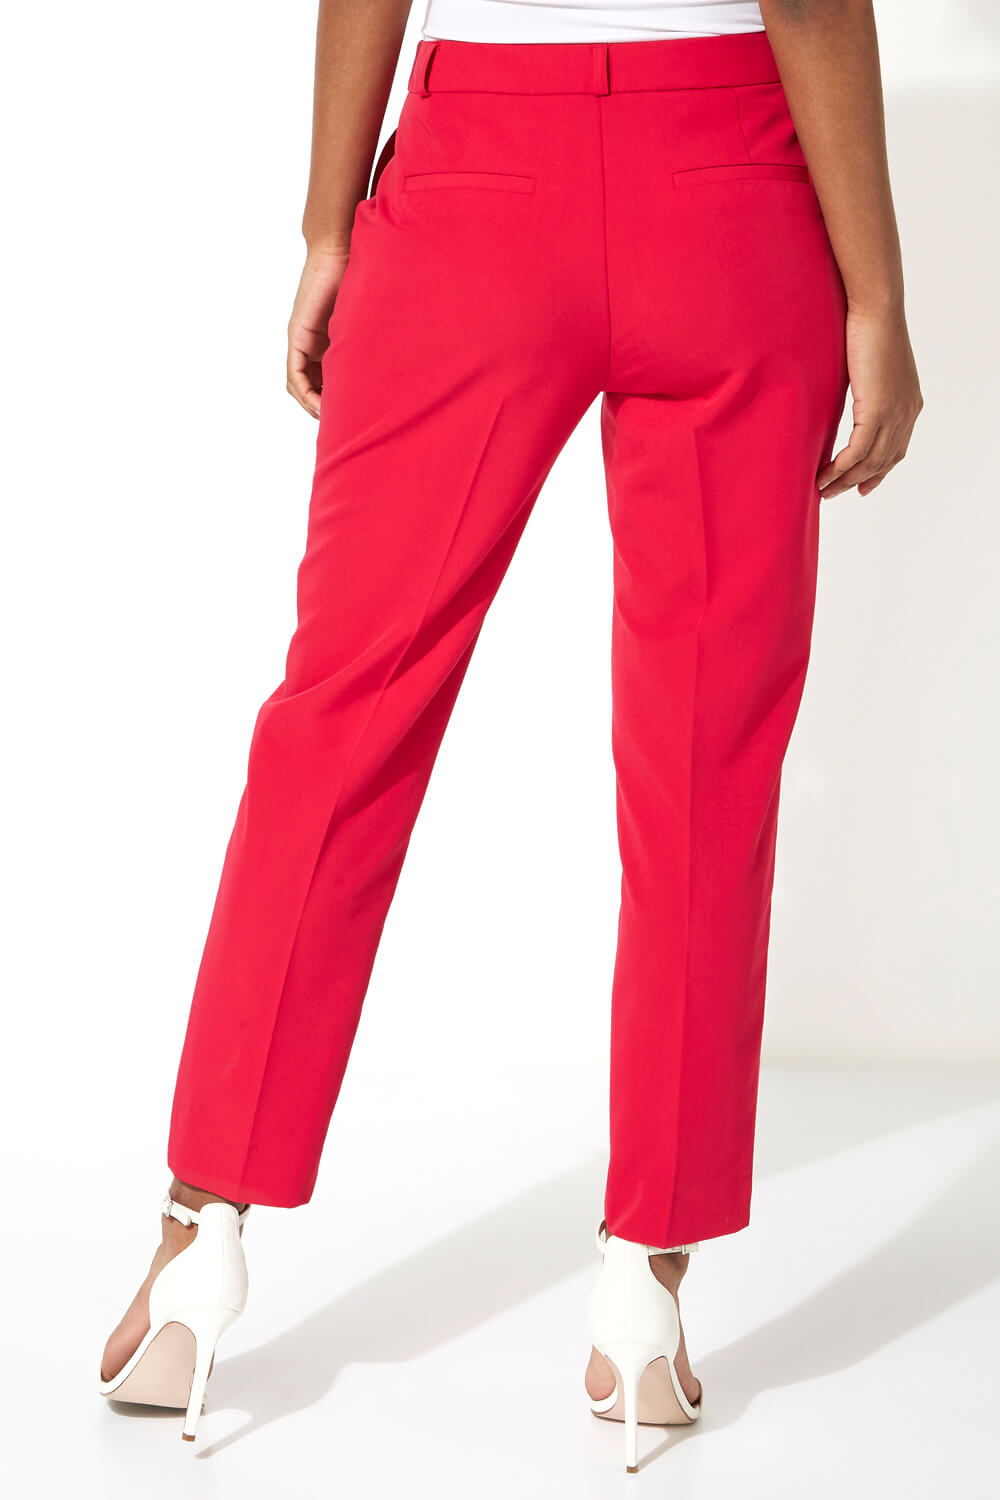 Fuchsia Straight Leg Tapered Trousers, Image 2 of 3